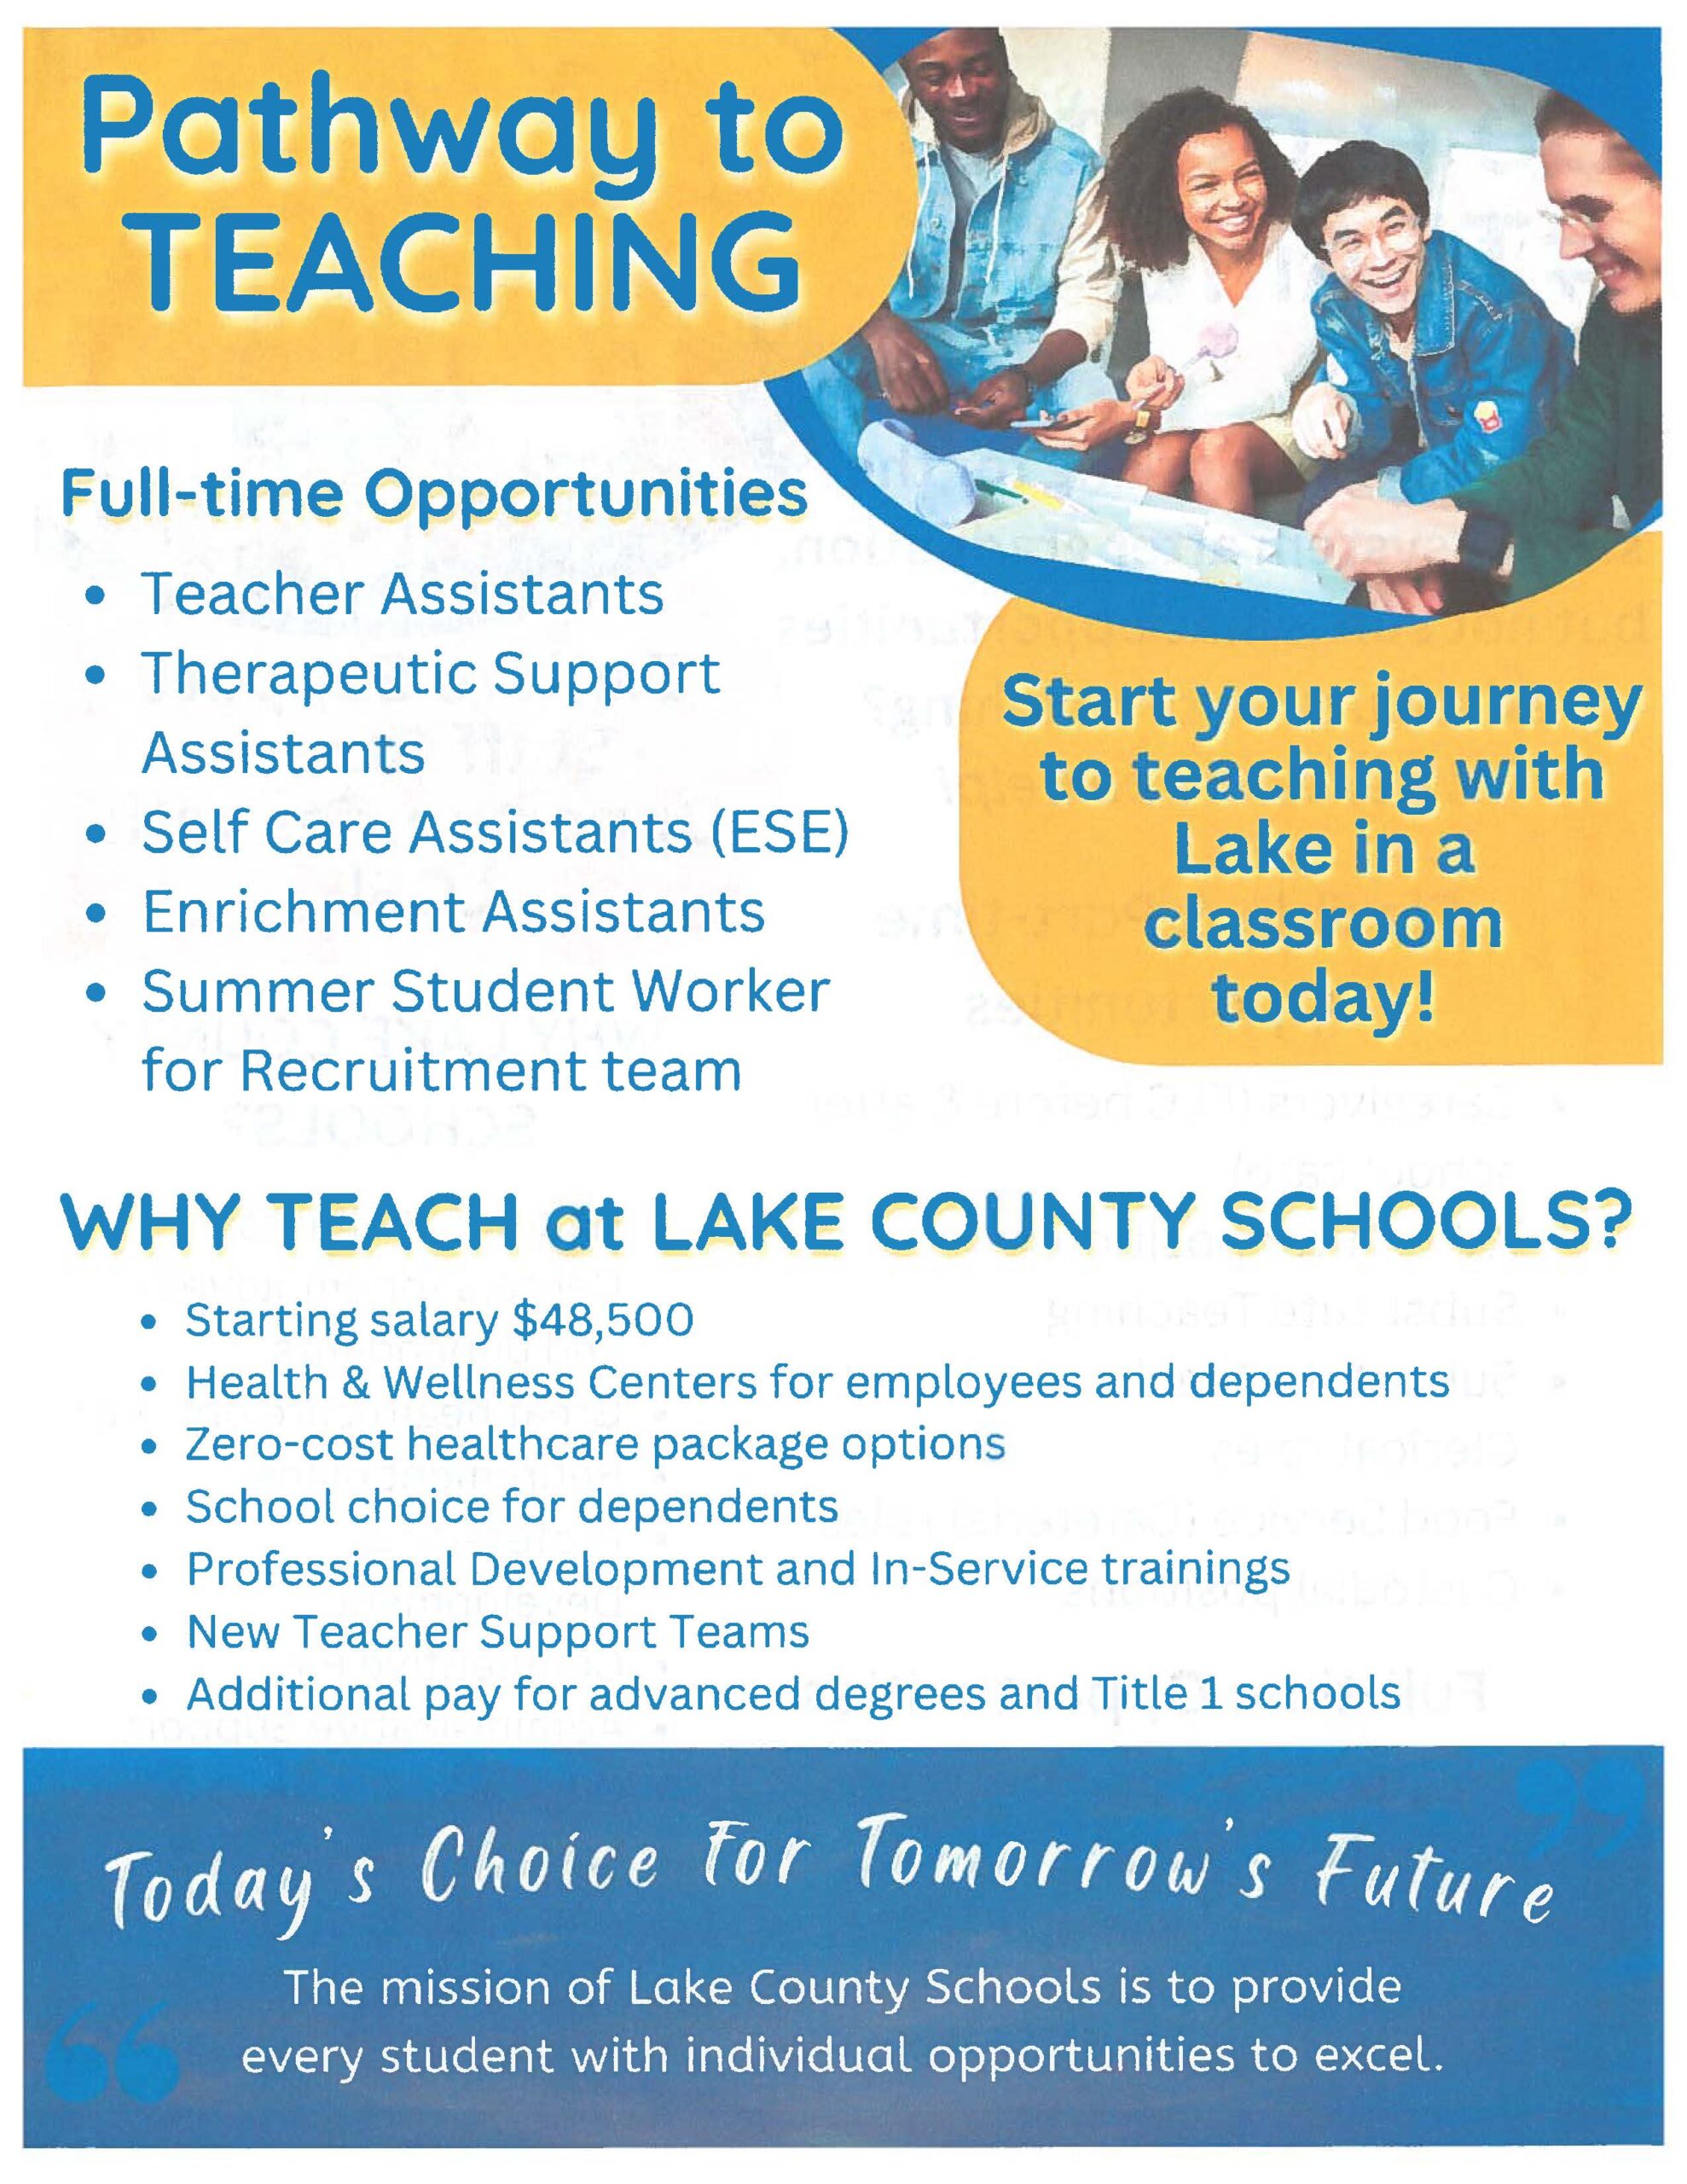 A flyer showing full-time opportunities at Lake County Schools - Page 1